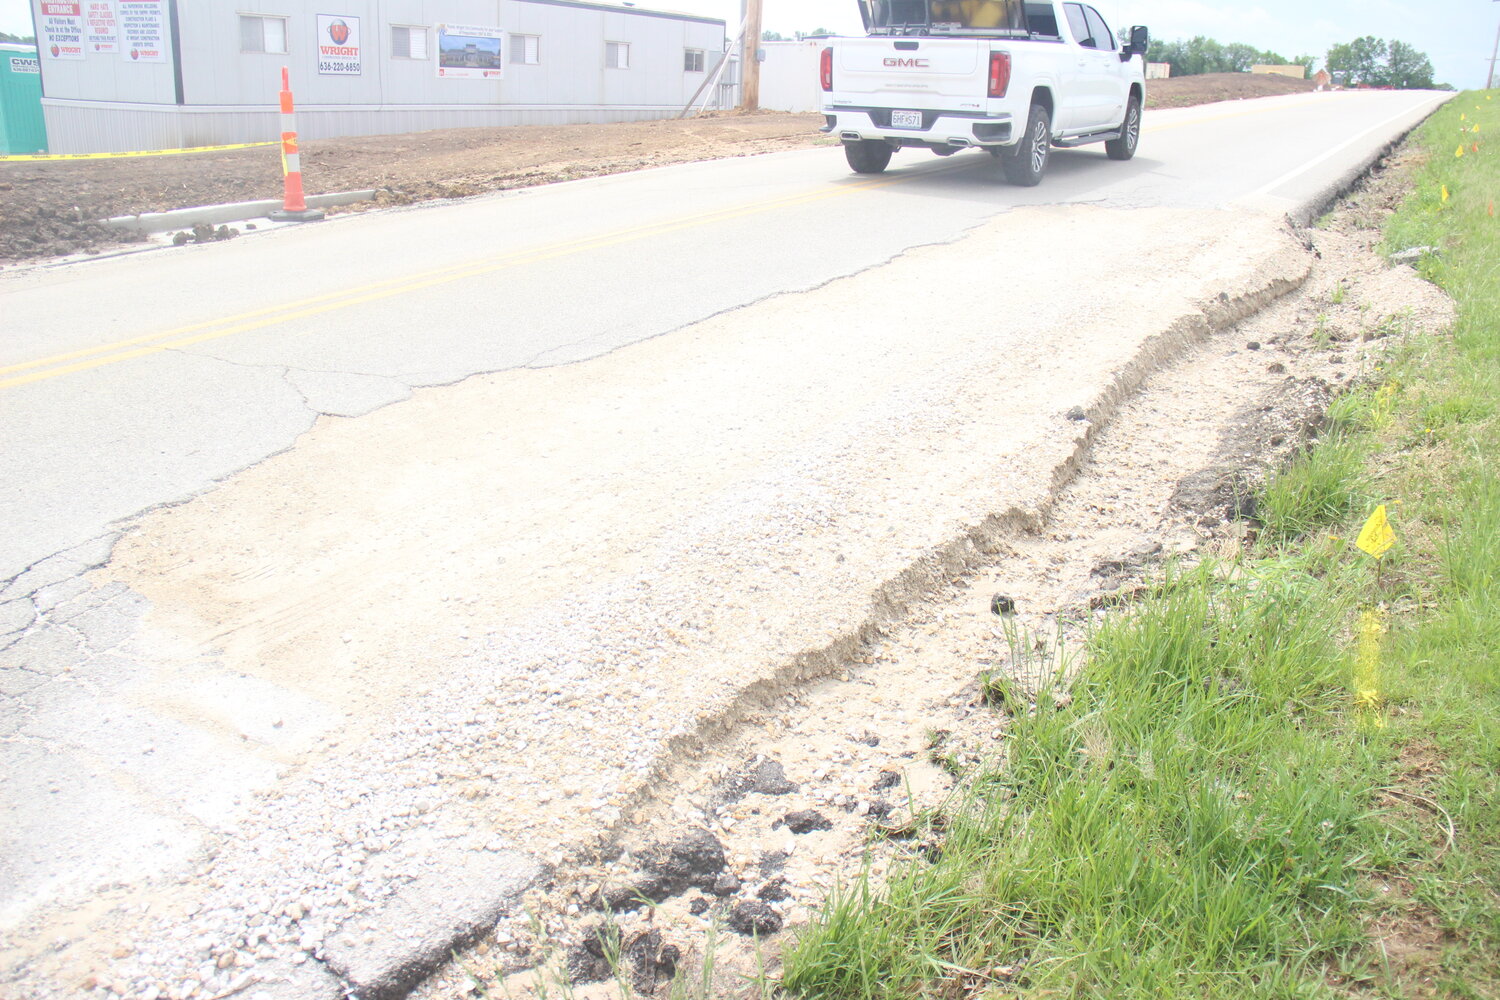 A truck drives past part of a deteriorating section of Roelker Road that has been filled with gravel.